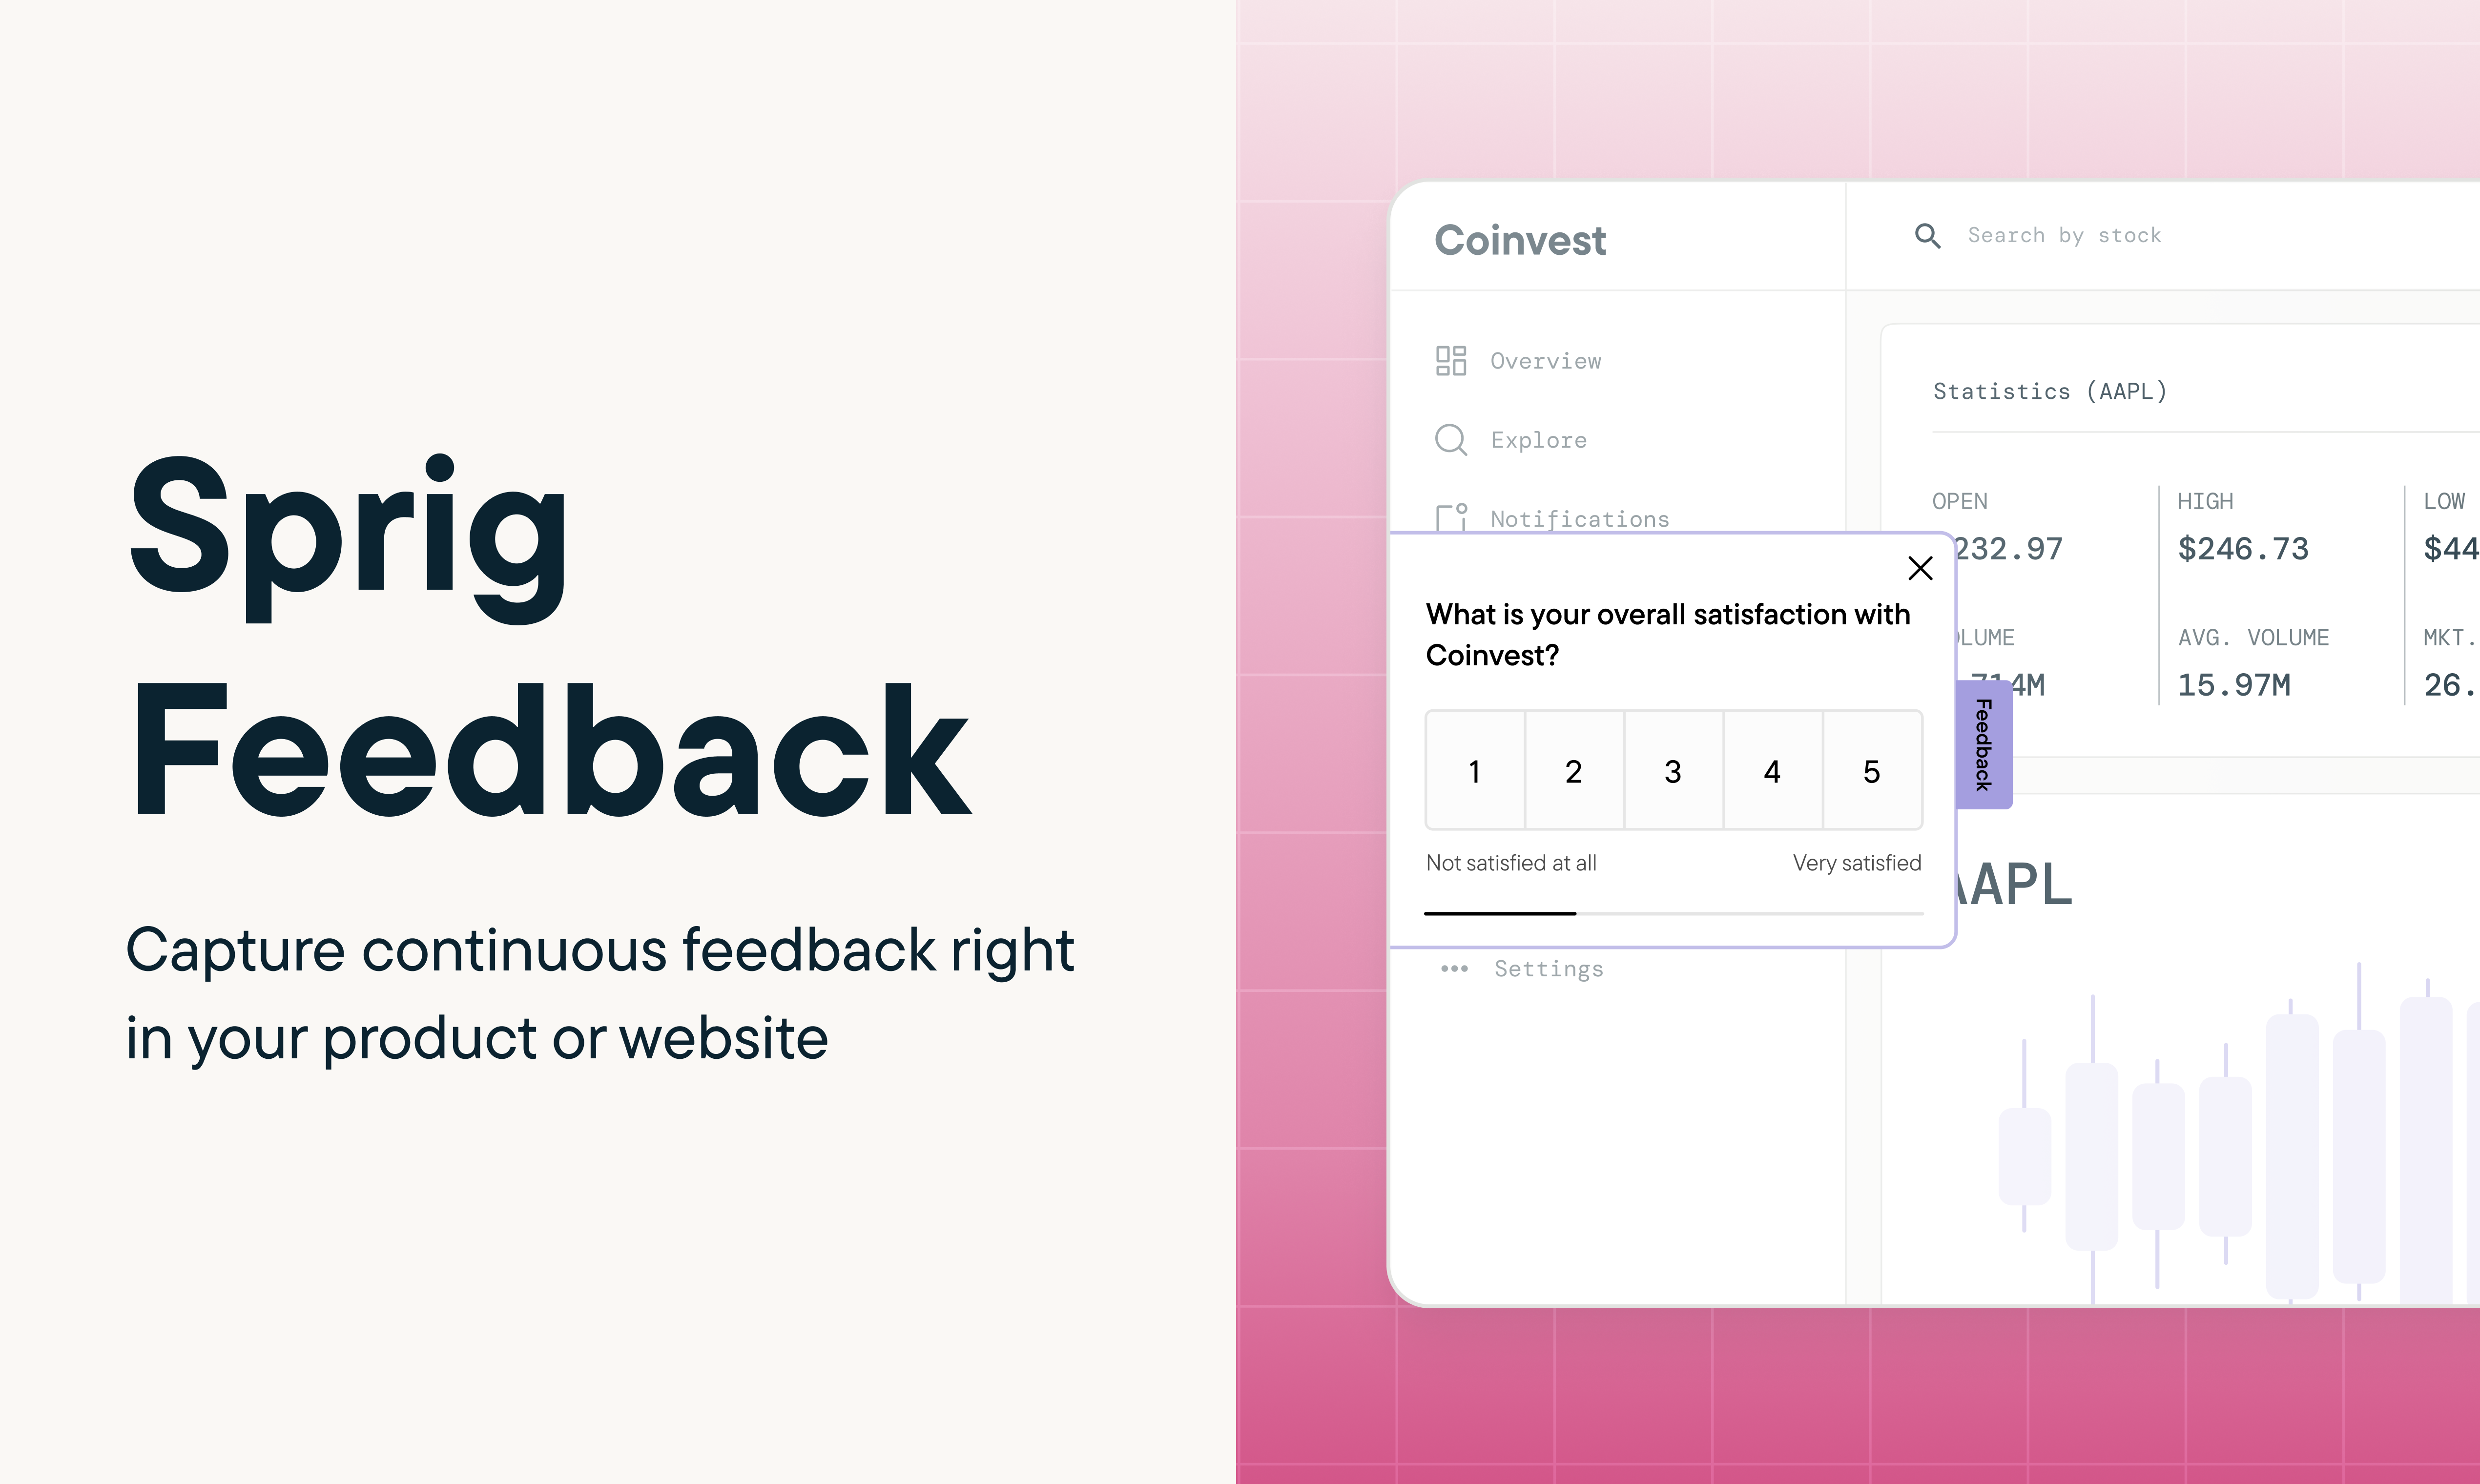 sprig-feedback - Capture continuous feedback right in your product or website